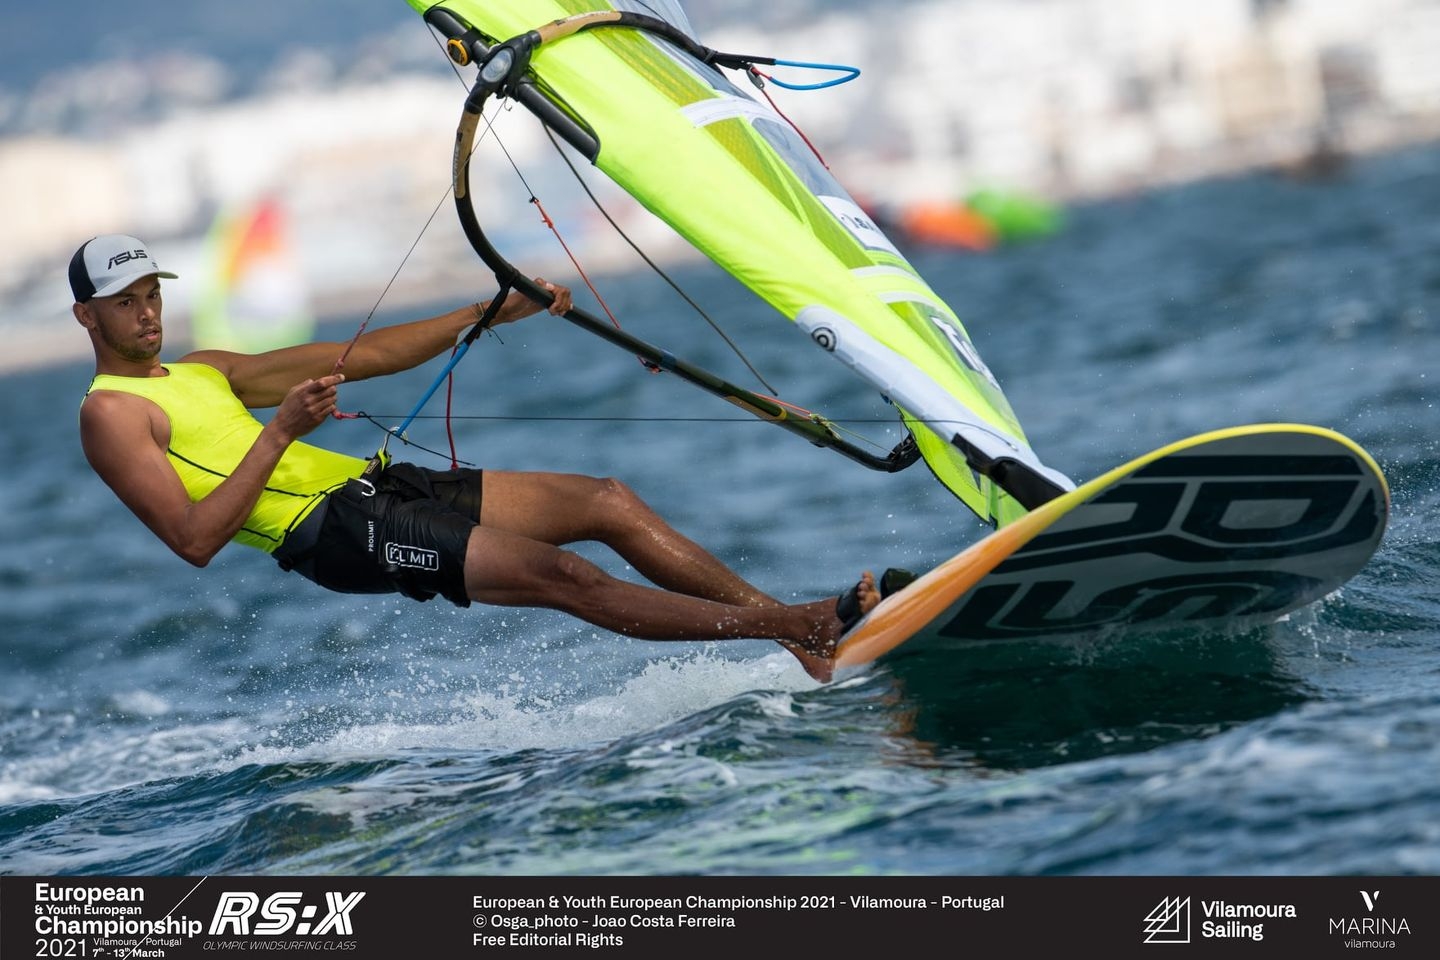  RS:XWindsurfing  European Championship 2021  Vilamoura POR  Final results, titles for NED and FRA